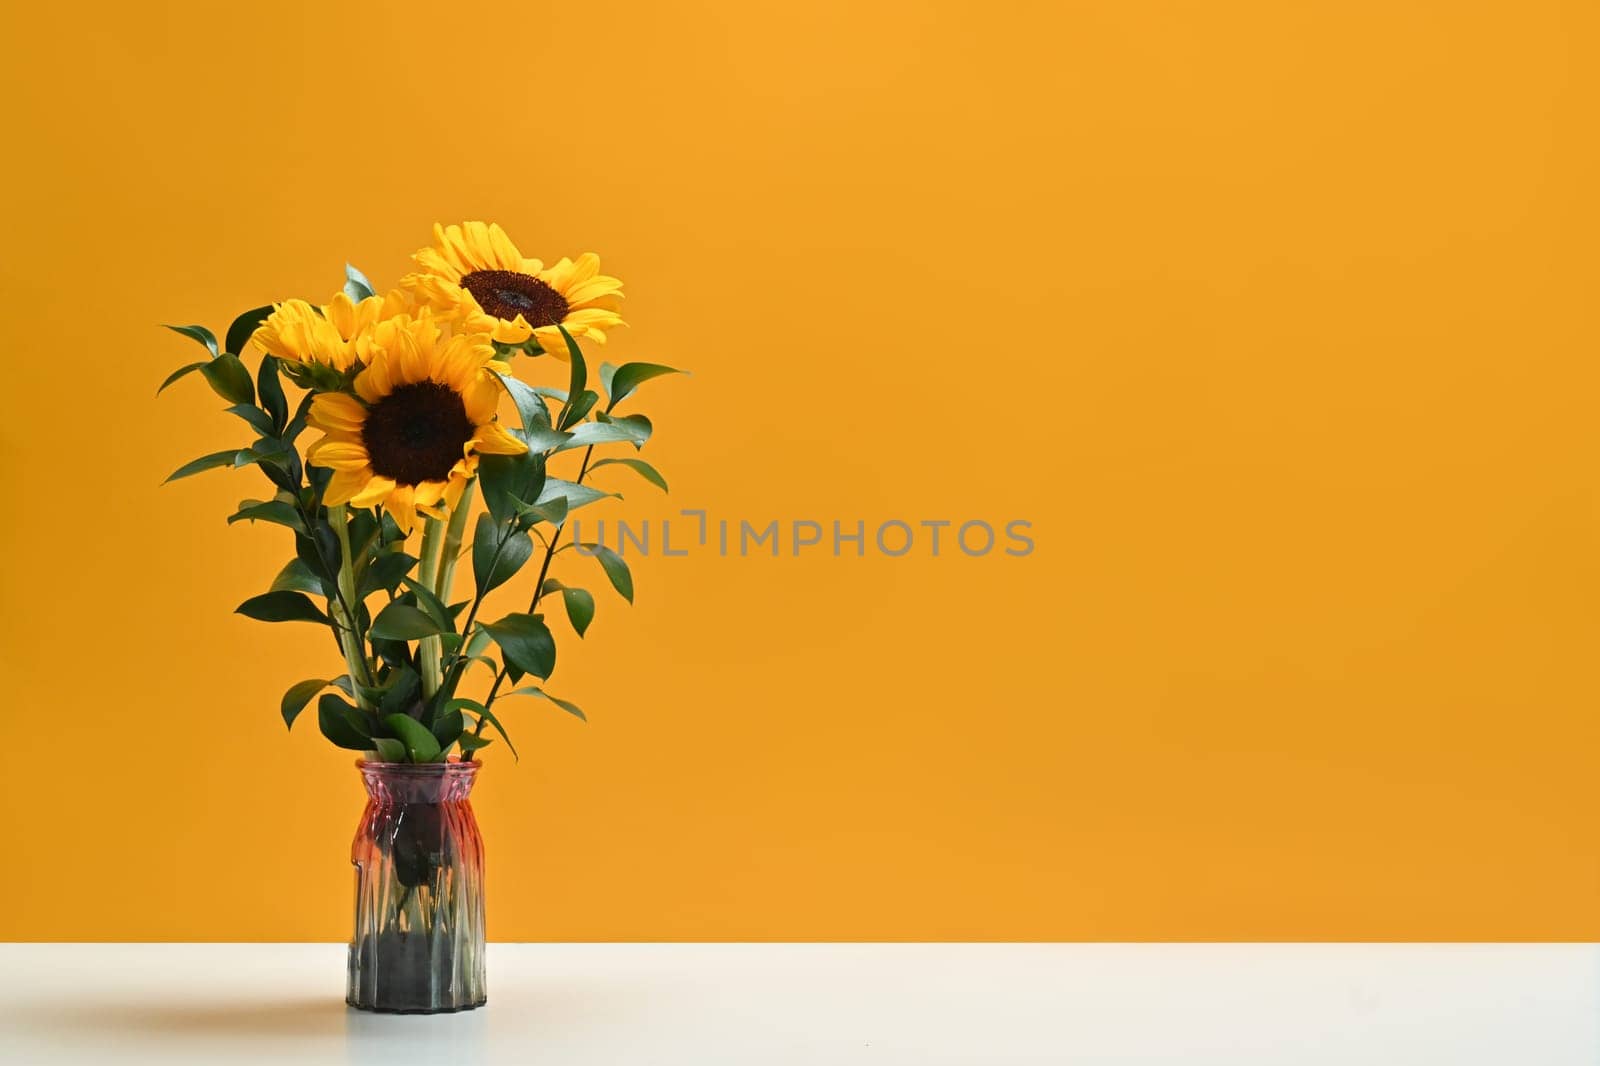 Sunflowers in vase over yellow background with copy space. Natural background, autumn or summer concept by prathanchorruangsak